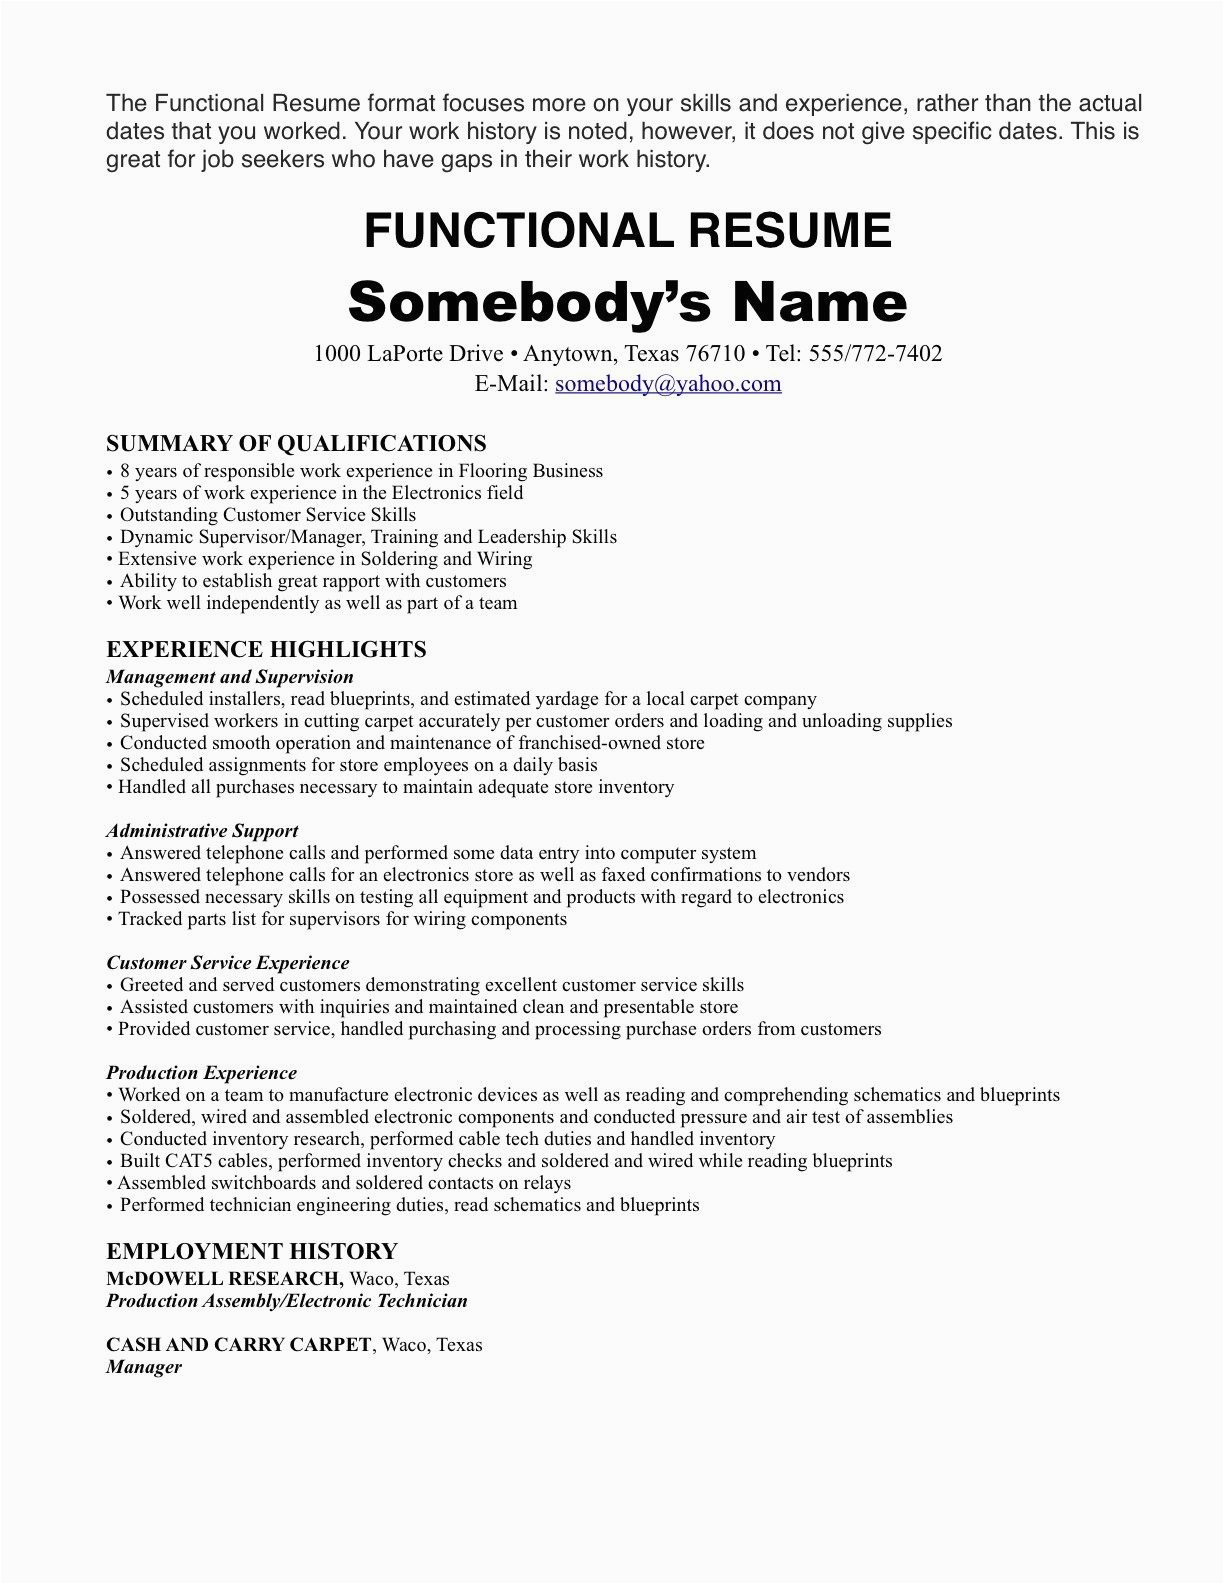 Sample Resume with Only One Job Experience E Job